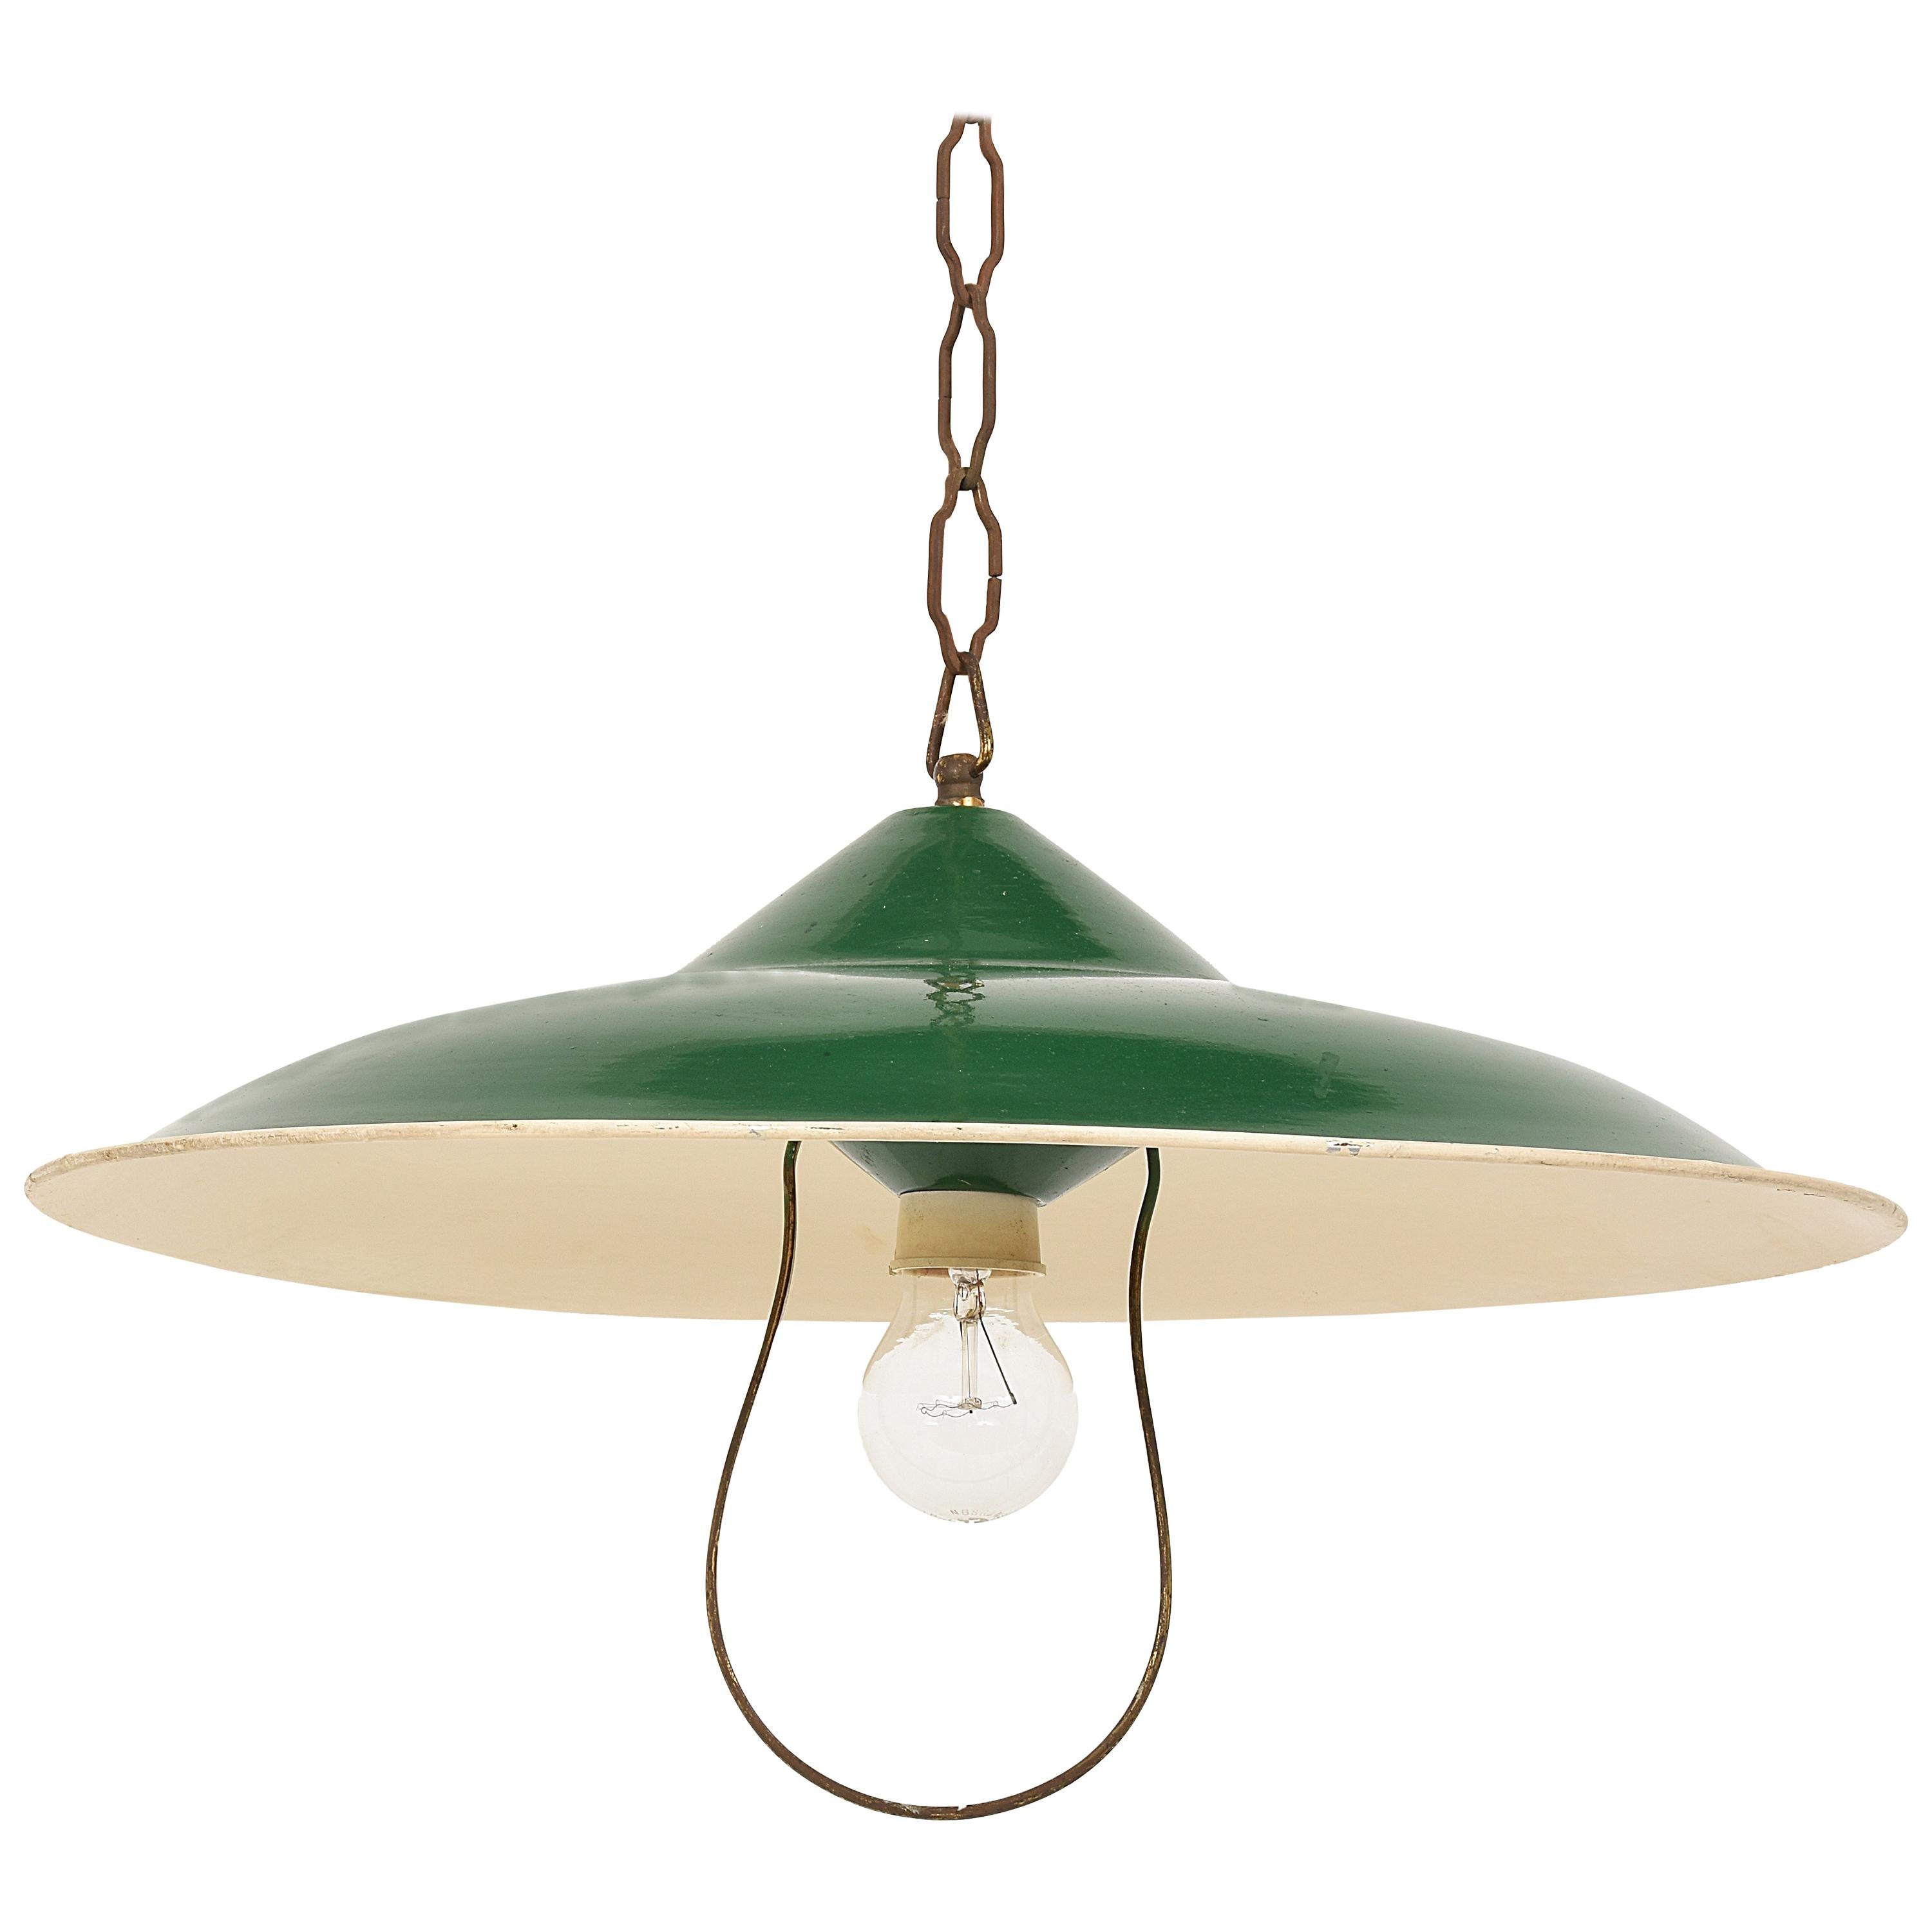 Chandelier in Green Glazed Metal Pendant Italy, Industrial Style of the 1950s